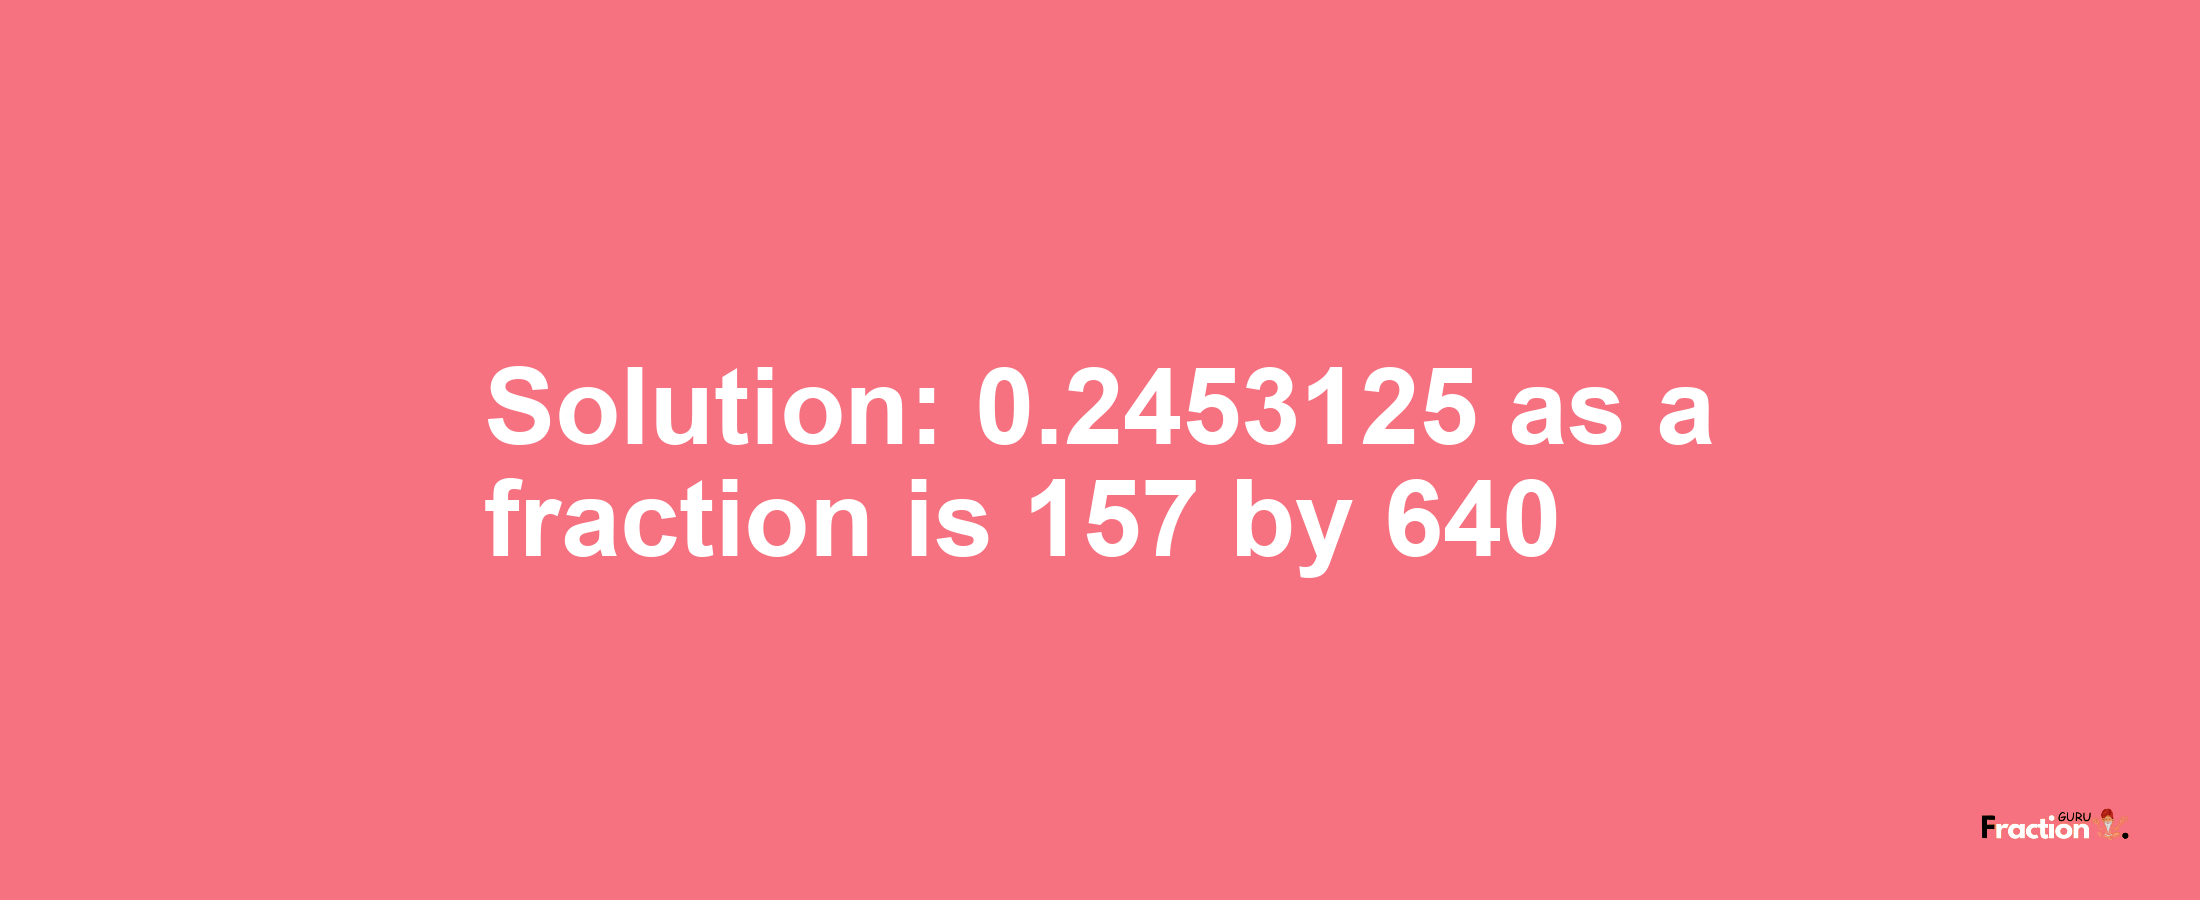 Solution:0.2453125 as a fraction is 157/640